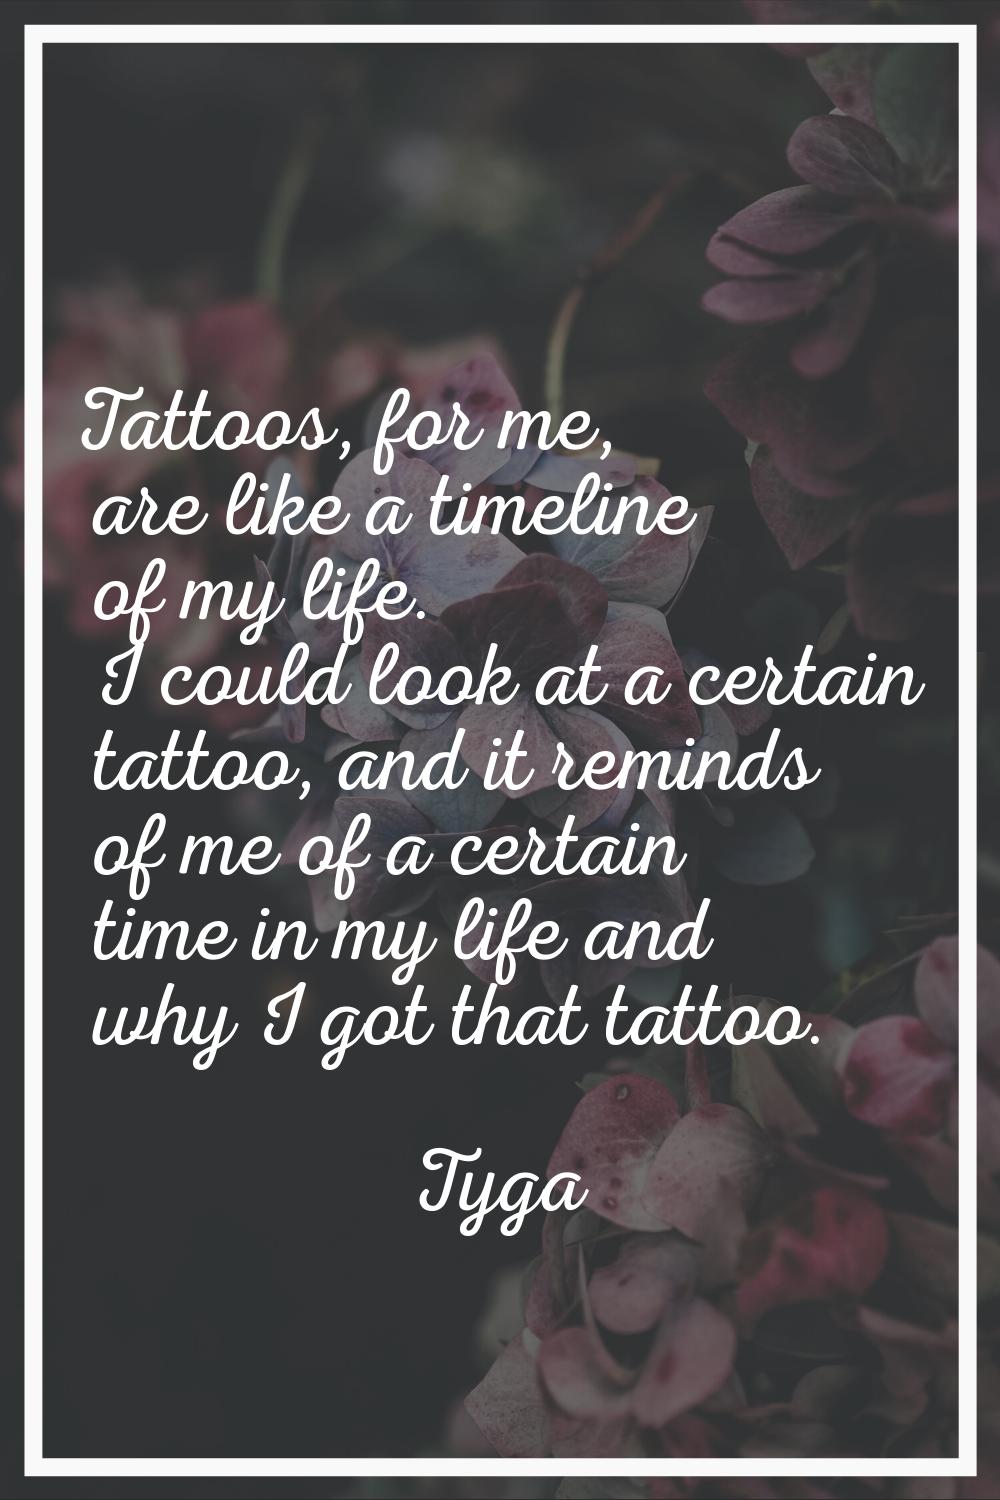 Tattoos, for me, are like a timeline of my life. I could look at a certain tattoo, and it reminds o